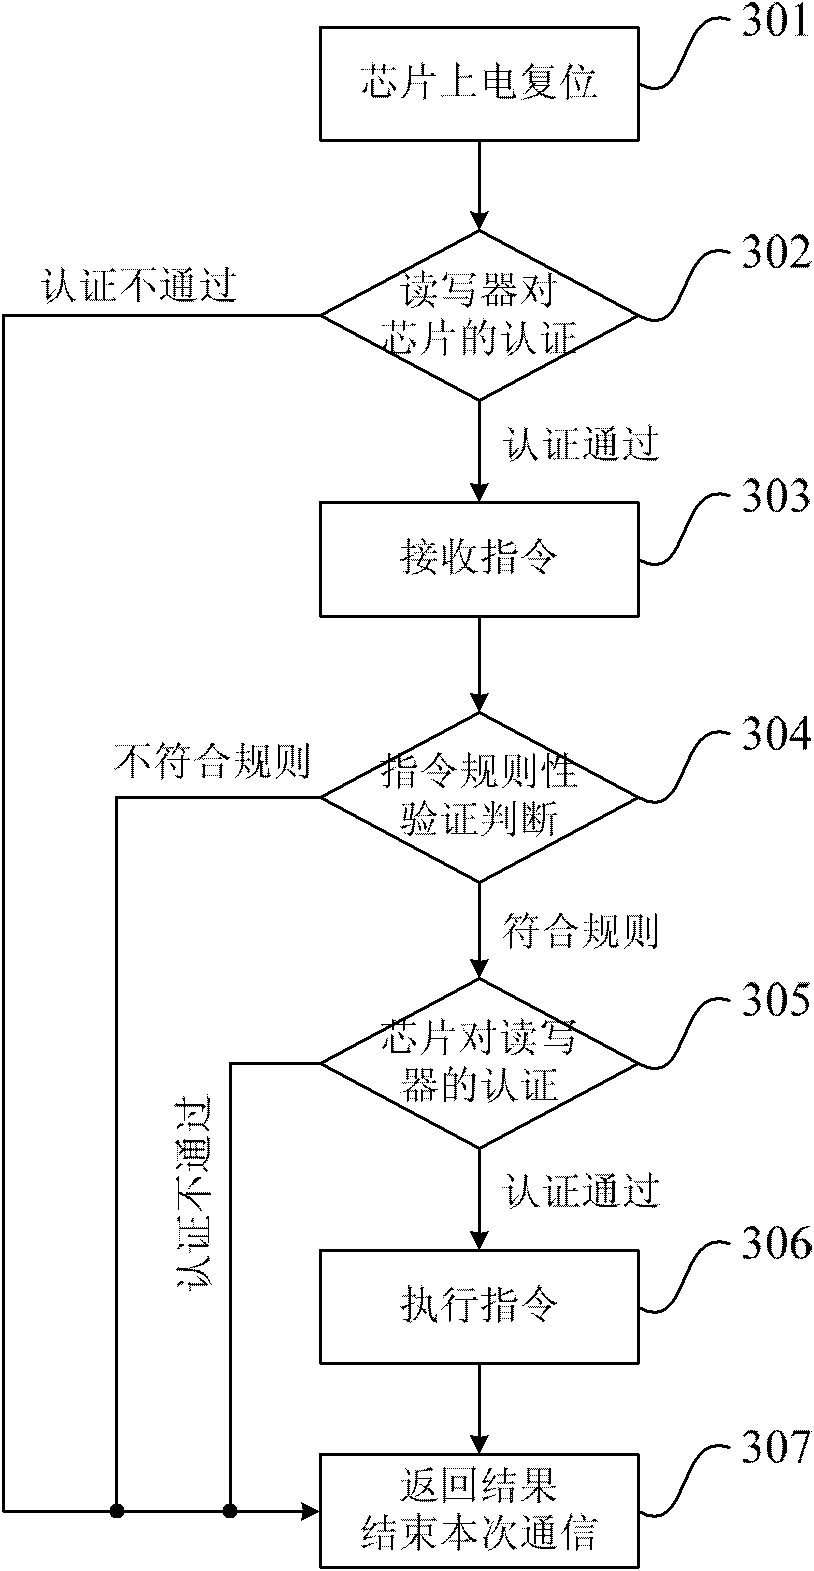 Passive ultra-high frequency radio frequency identification (RFID) electronic tag chip special for vehicle and control method